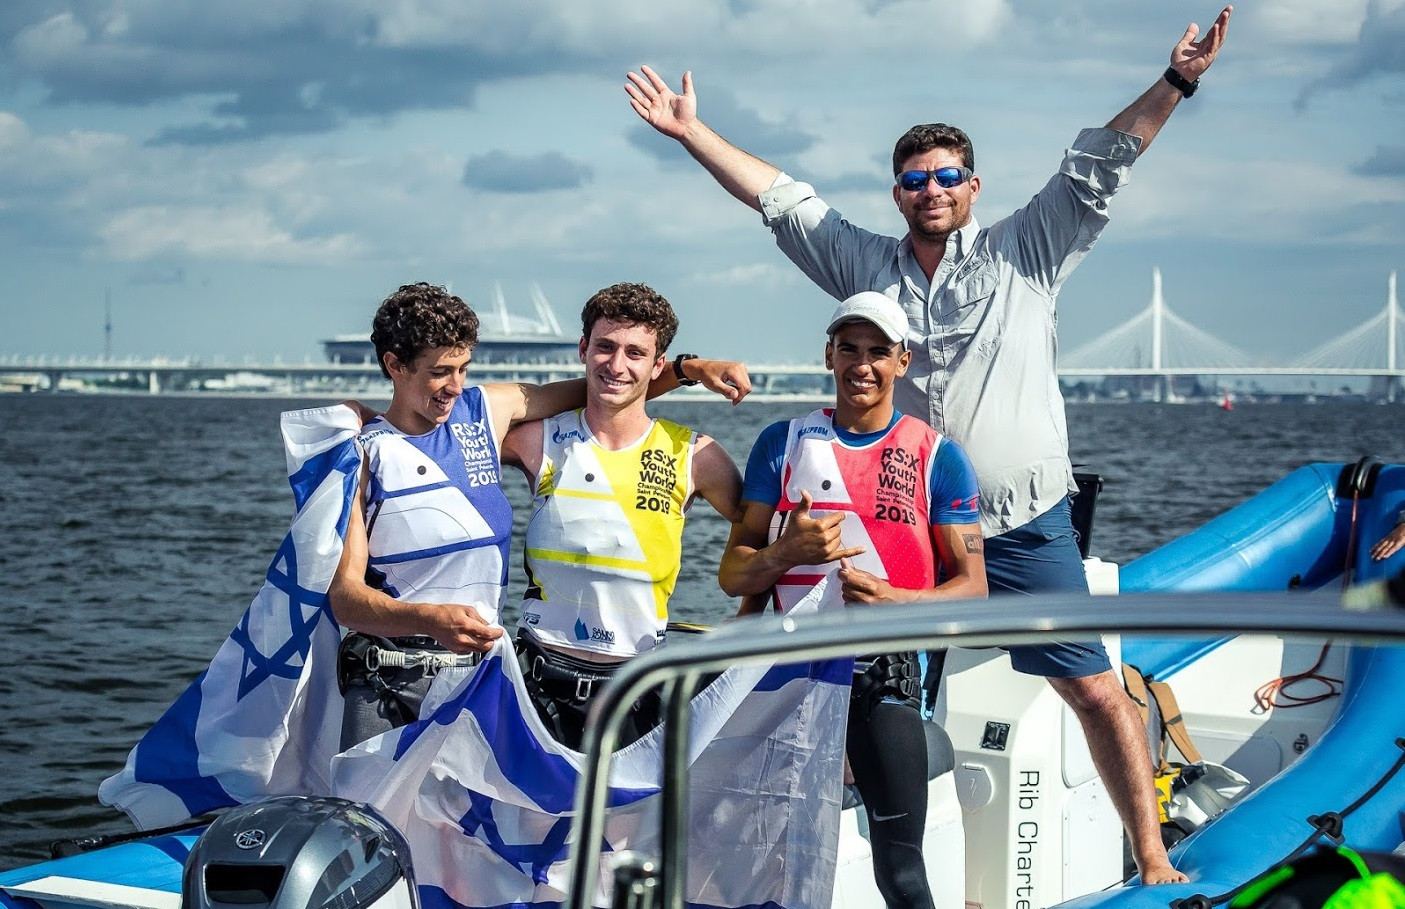 Israeli sailors finished in the top three places of the men's competition ©World Sailing